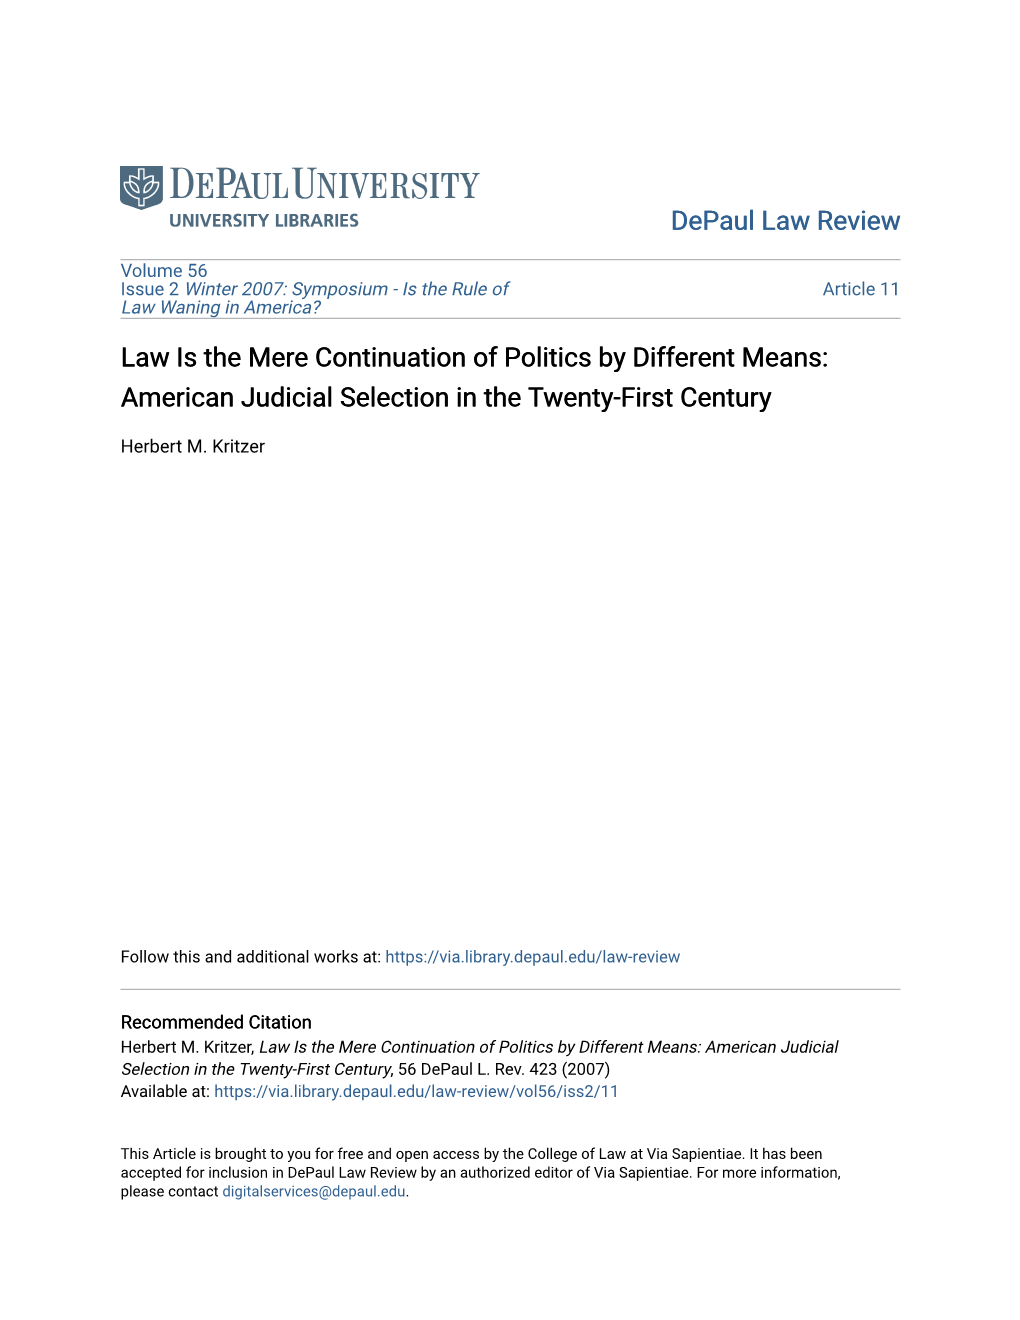 Law Is the Mere Continuation of Politics by Different Means: American Judicial Selection in the Twenty-First Century